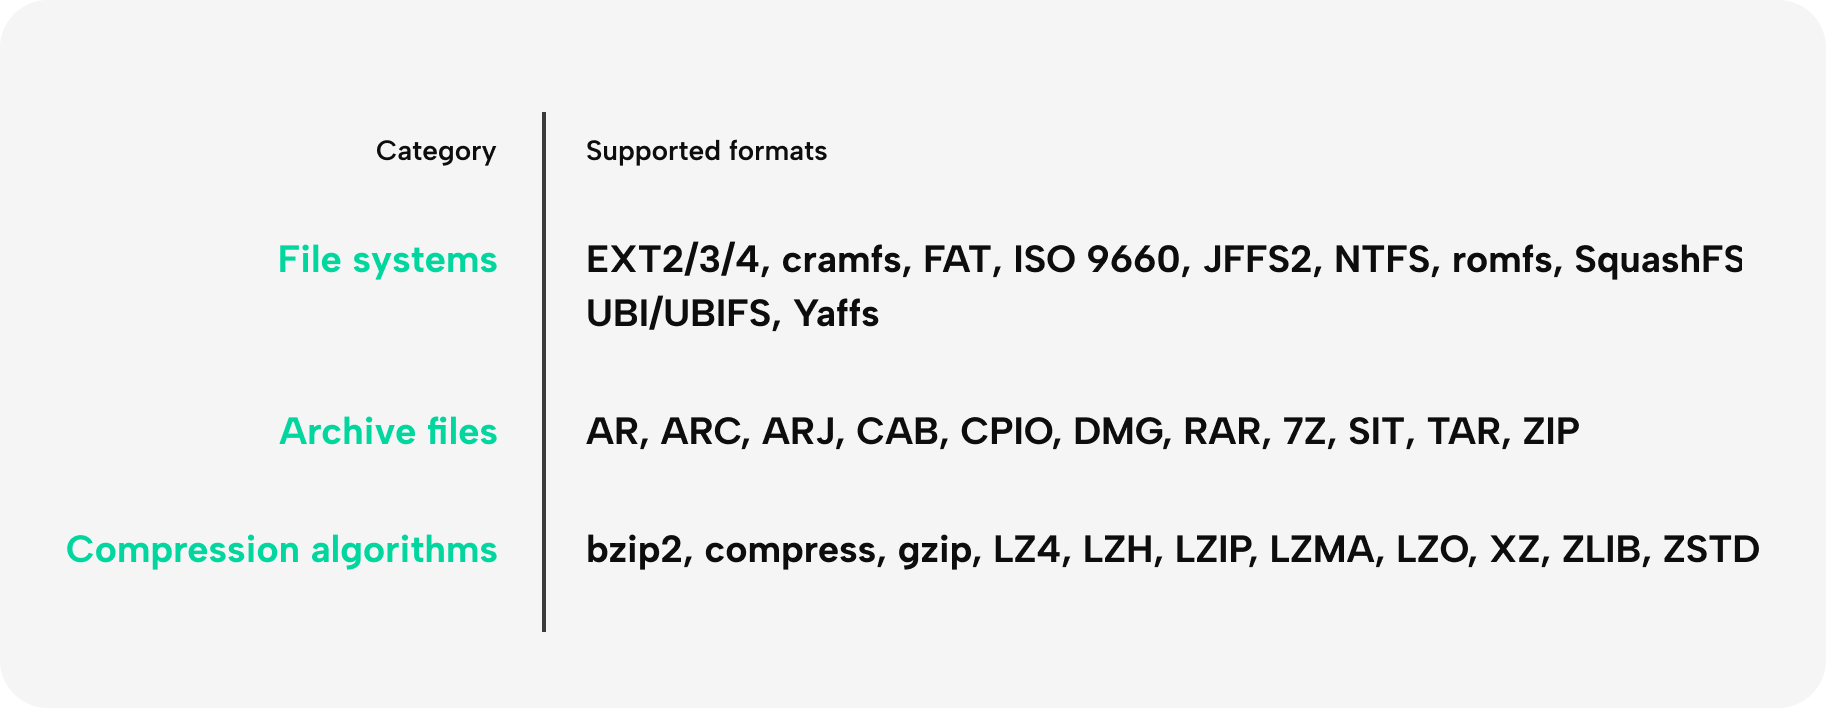 Firmware image formats supported by BugProve